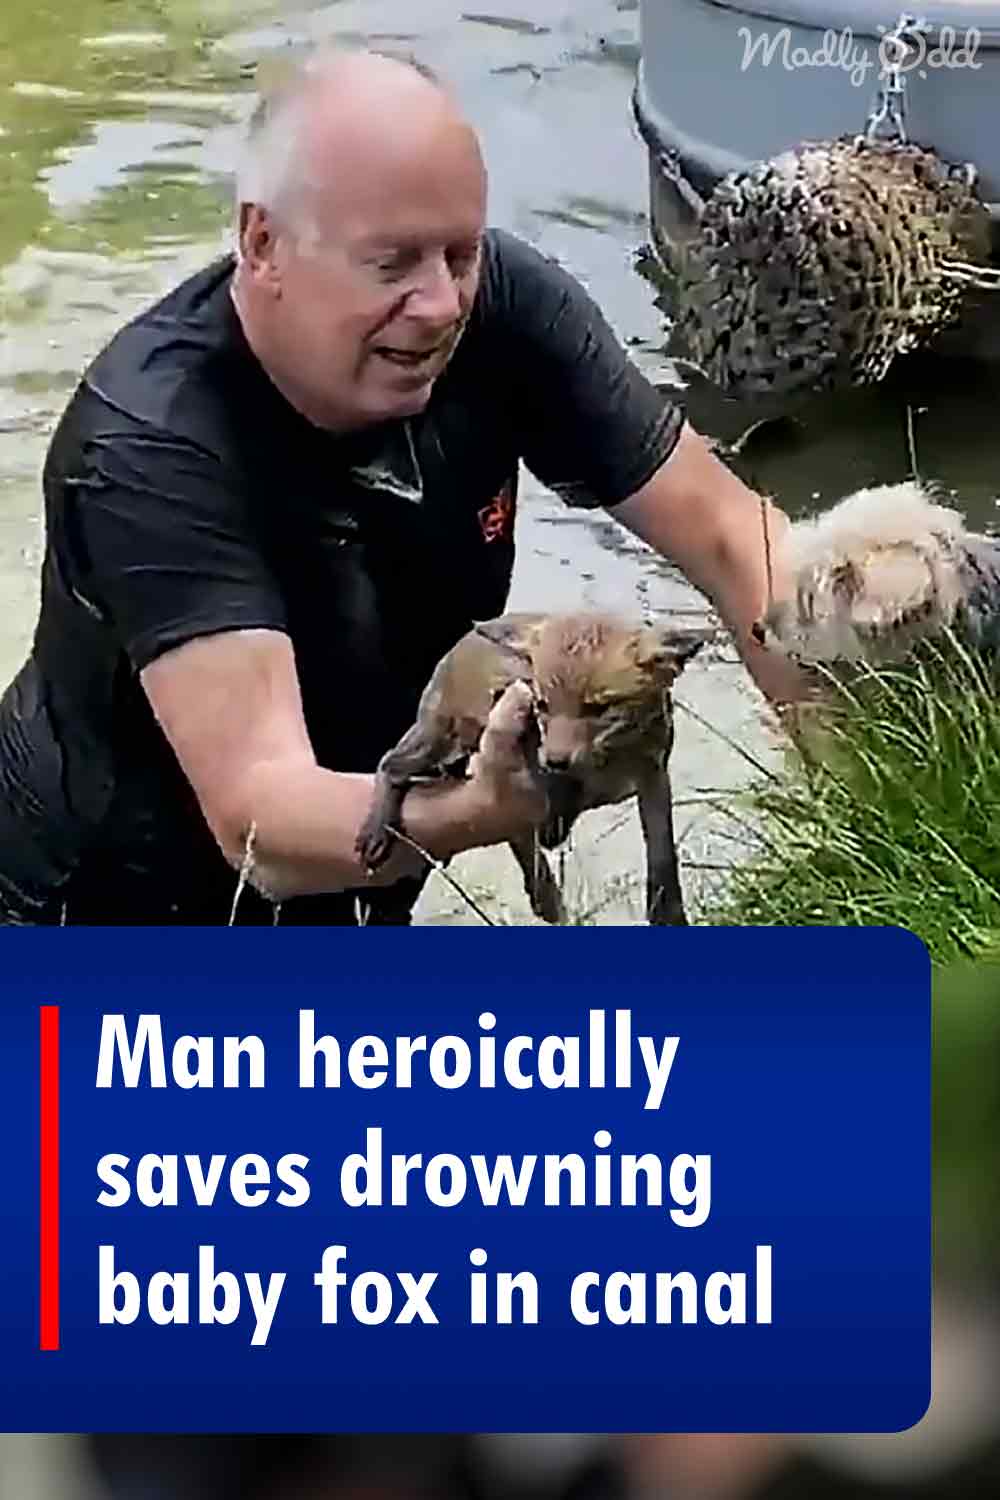 Man heroically saves drowning baby fox in canal